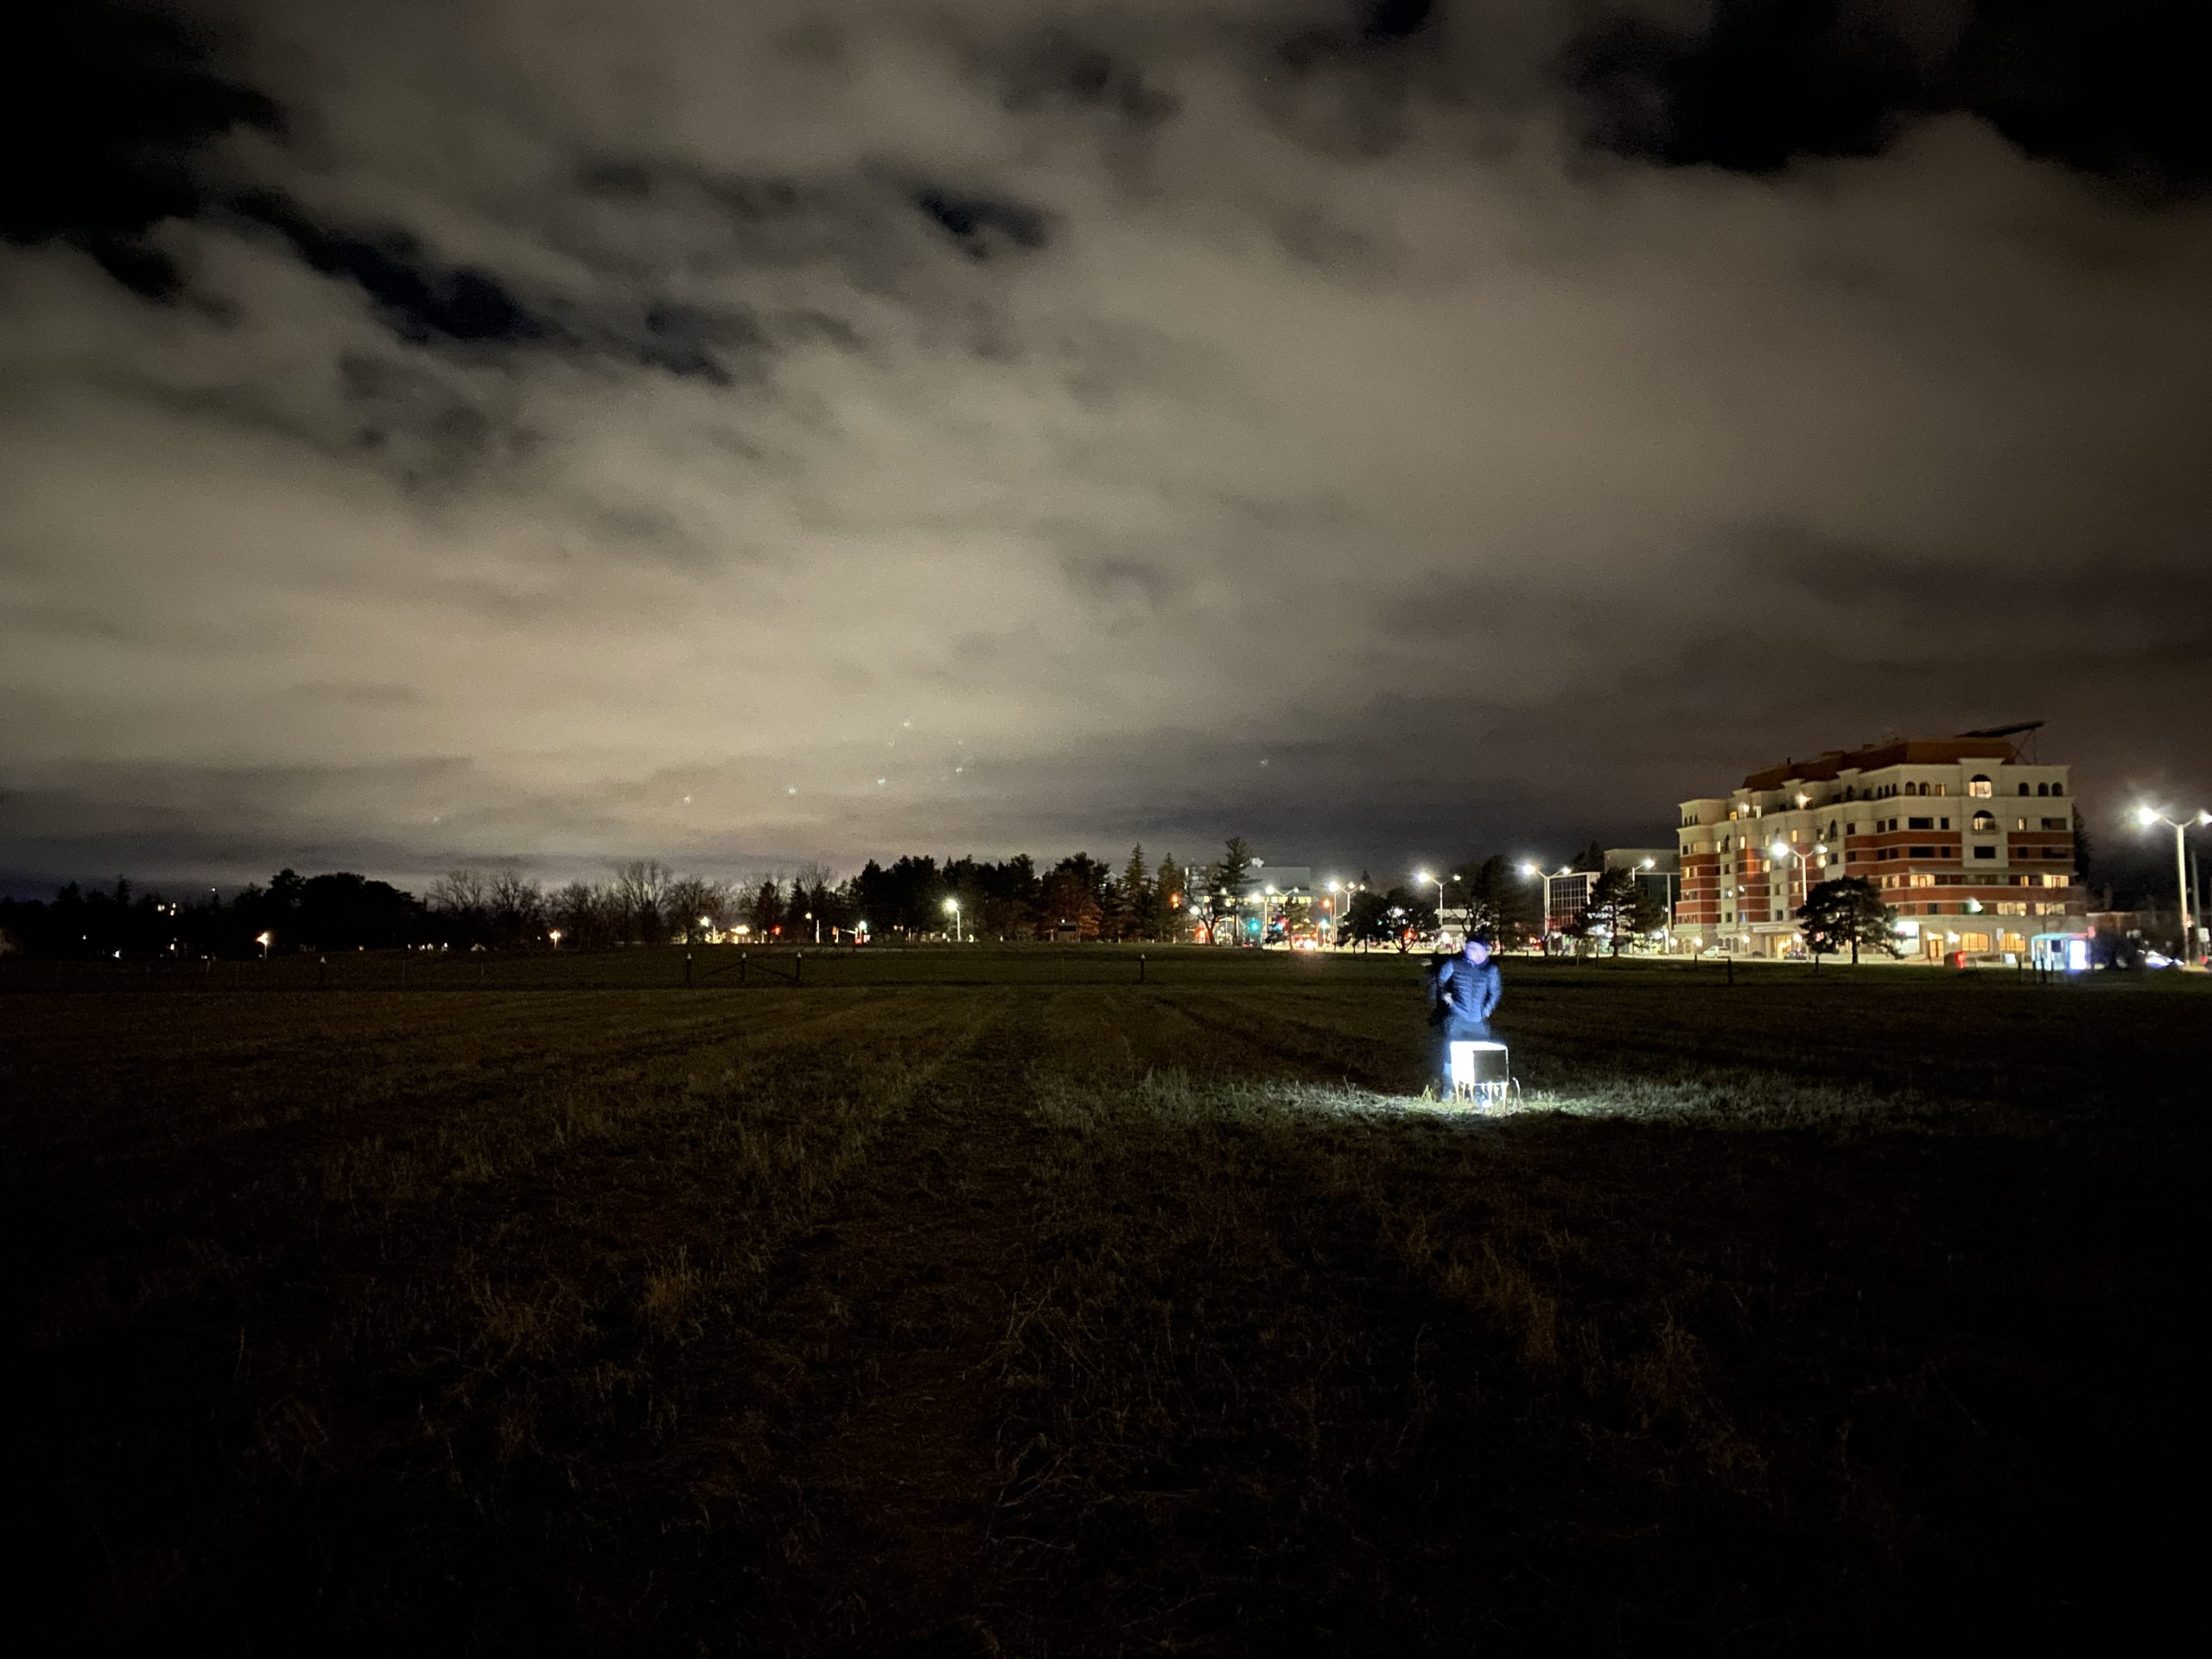 night-time view of a field with a glowing art installation at the centre